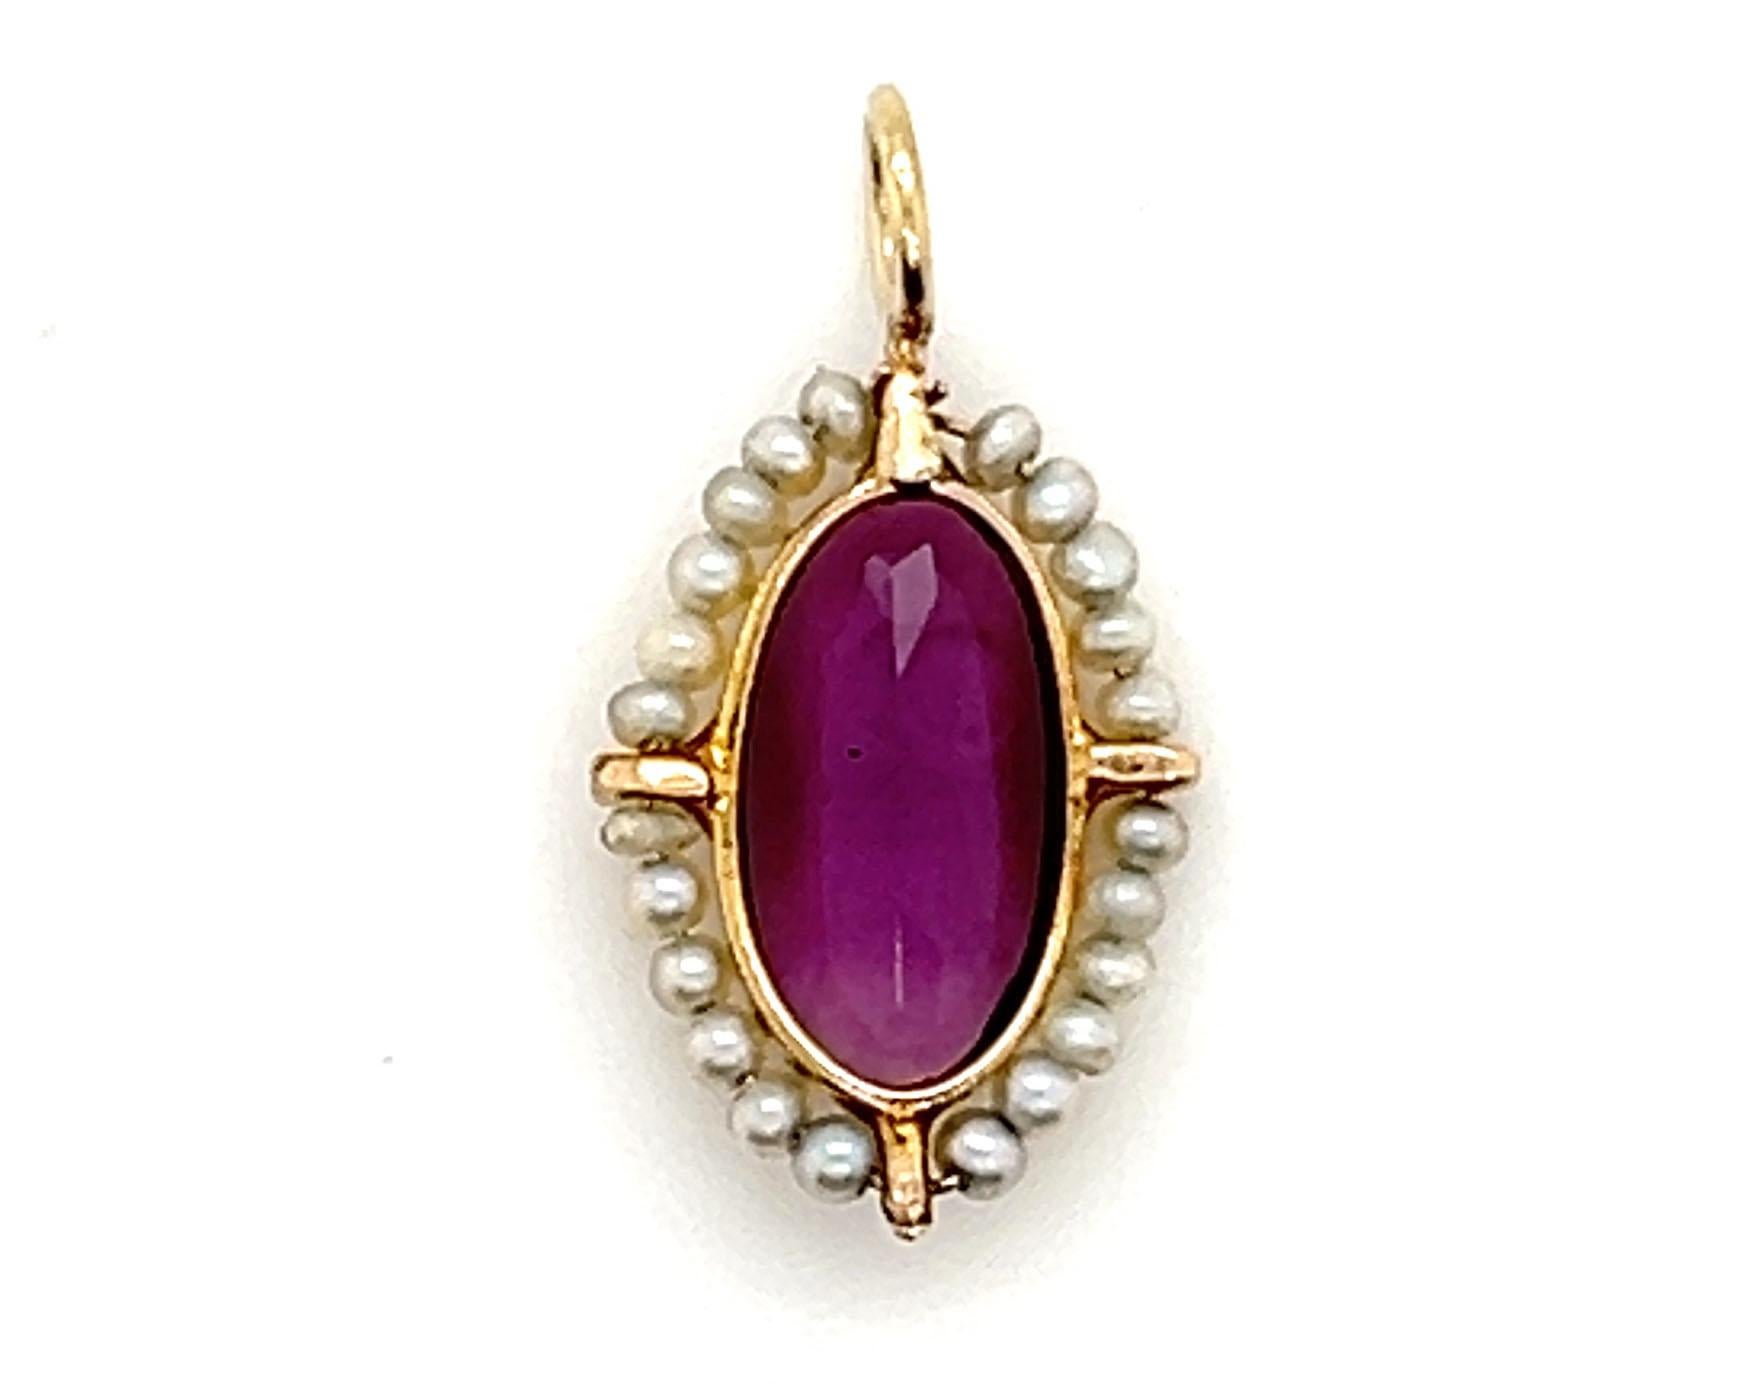 Genuine Original Antique from 1880's Antique 1ct Amethyst Pearl 14K Yellow Gold Victorian Necklace Pendant


Features a Genuine 1ct Natural Amethyst Gemstone

Amethyst is a Custom Cut Smooth Top Faceted Bottom Gemstone

Surrounded Beautifully by